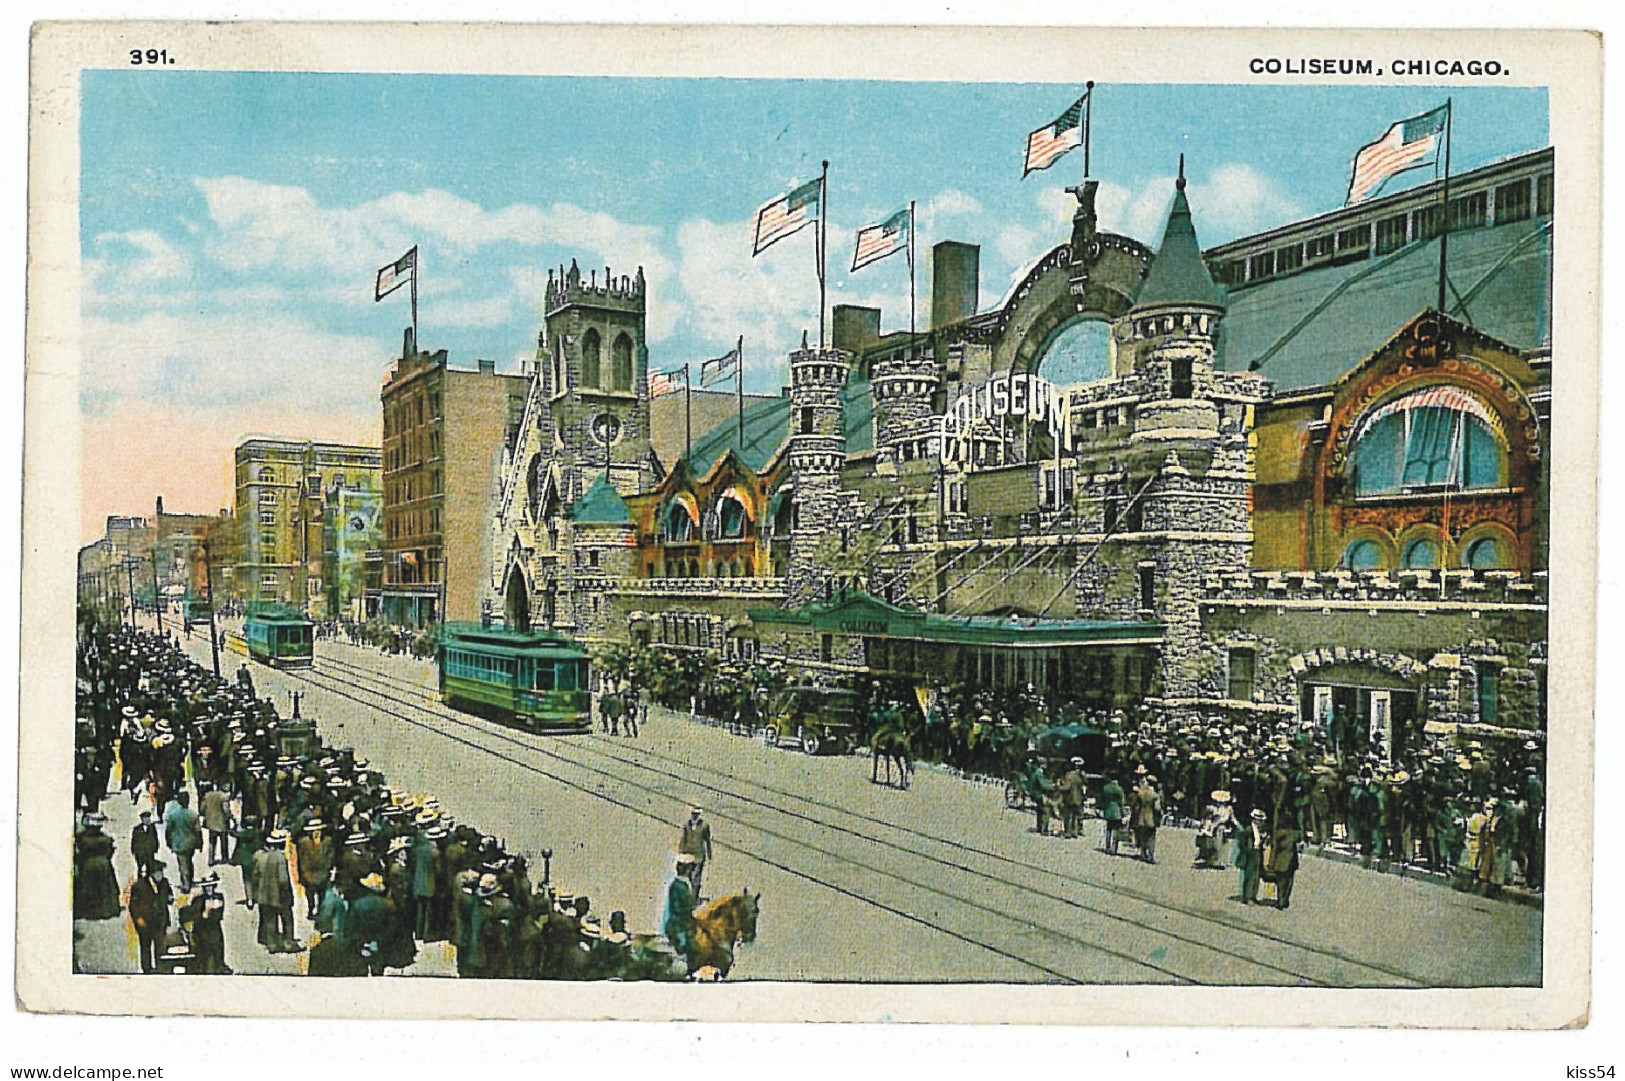 US 24 - 6082 CHICAGO, USA, Coliseum, Tramway - Old Postcard - Used - 1920 - Chicago